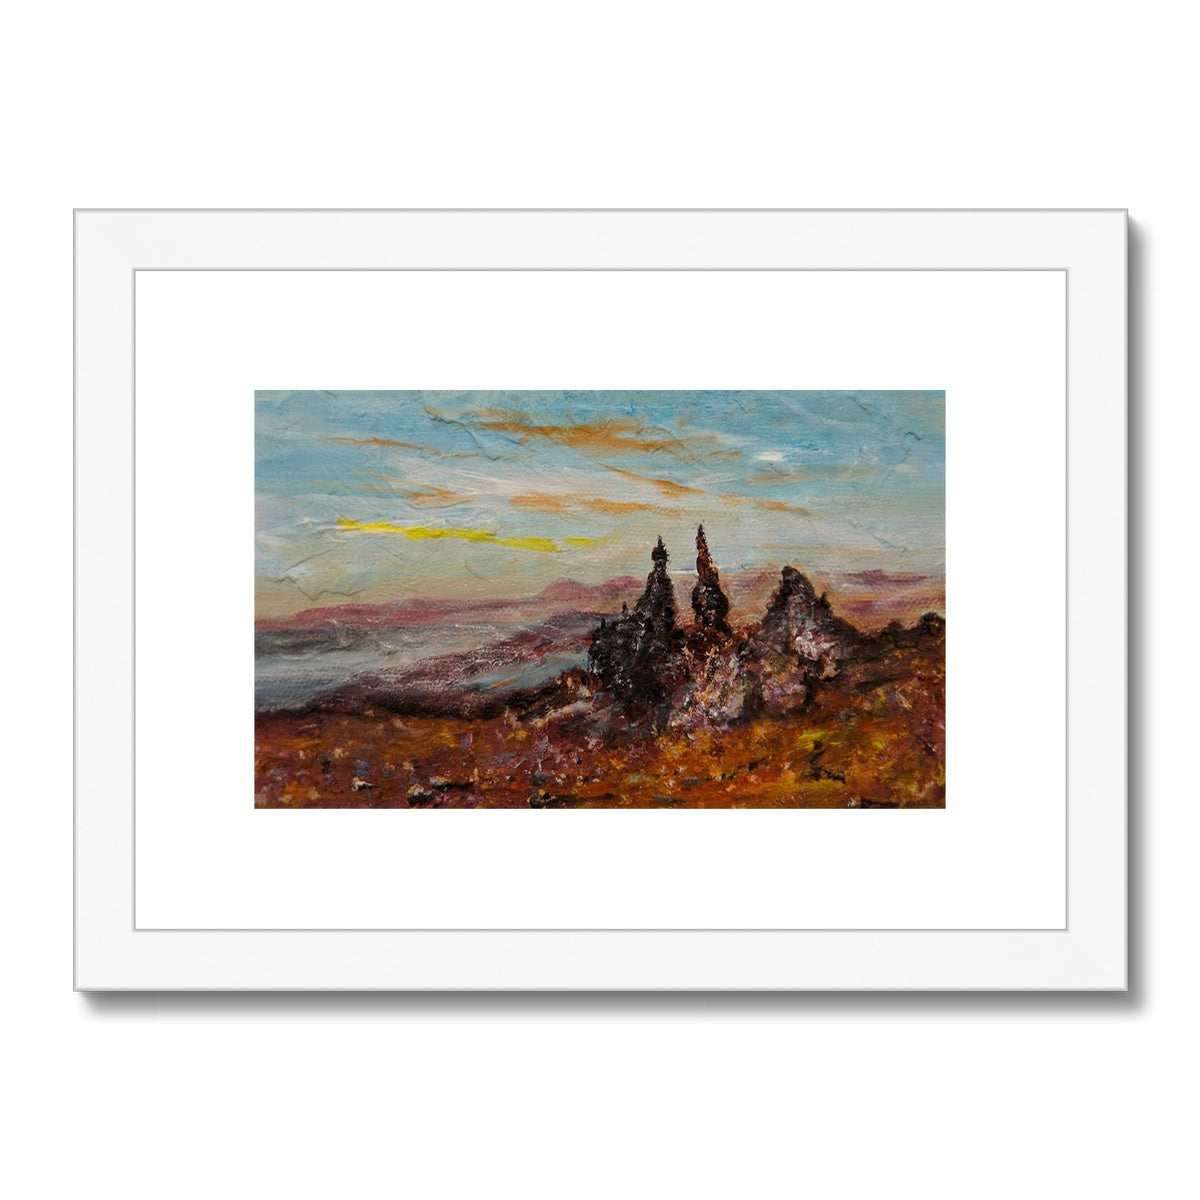 The Storr Skye Painting | Framed & Mounted Prints From Scotland-Framed & Mounted Prints-Skye Art Gallery-A4 Landscape-White Frame-Paintings, Prints, Homeware, Art Gifts From Scotland By Scottish Artist Kevin Hunter